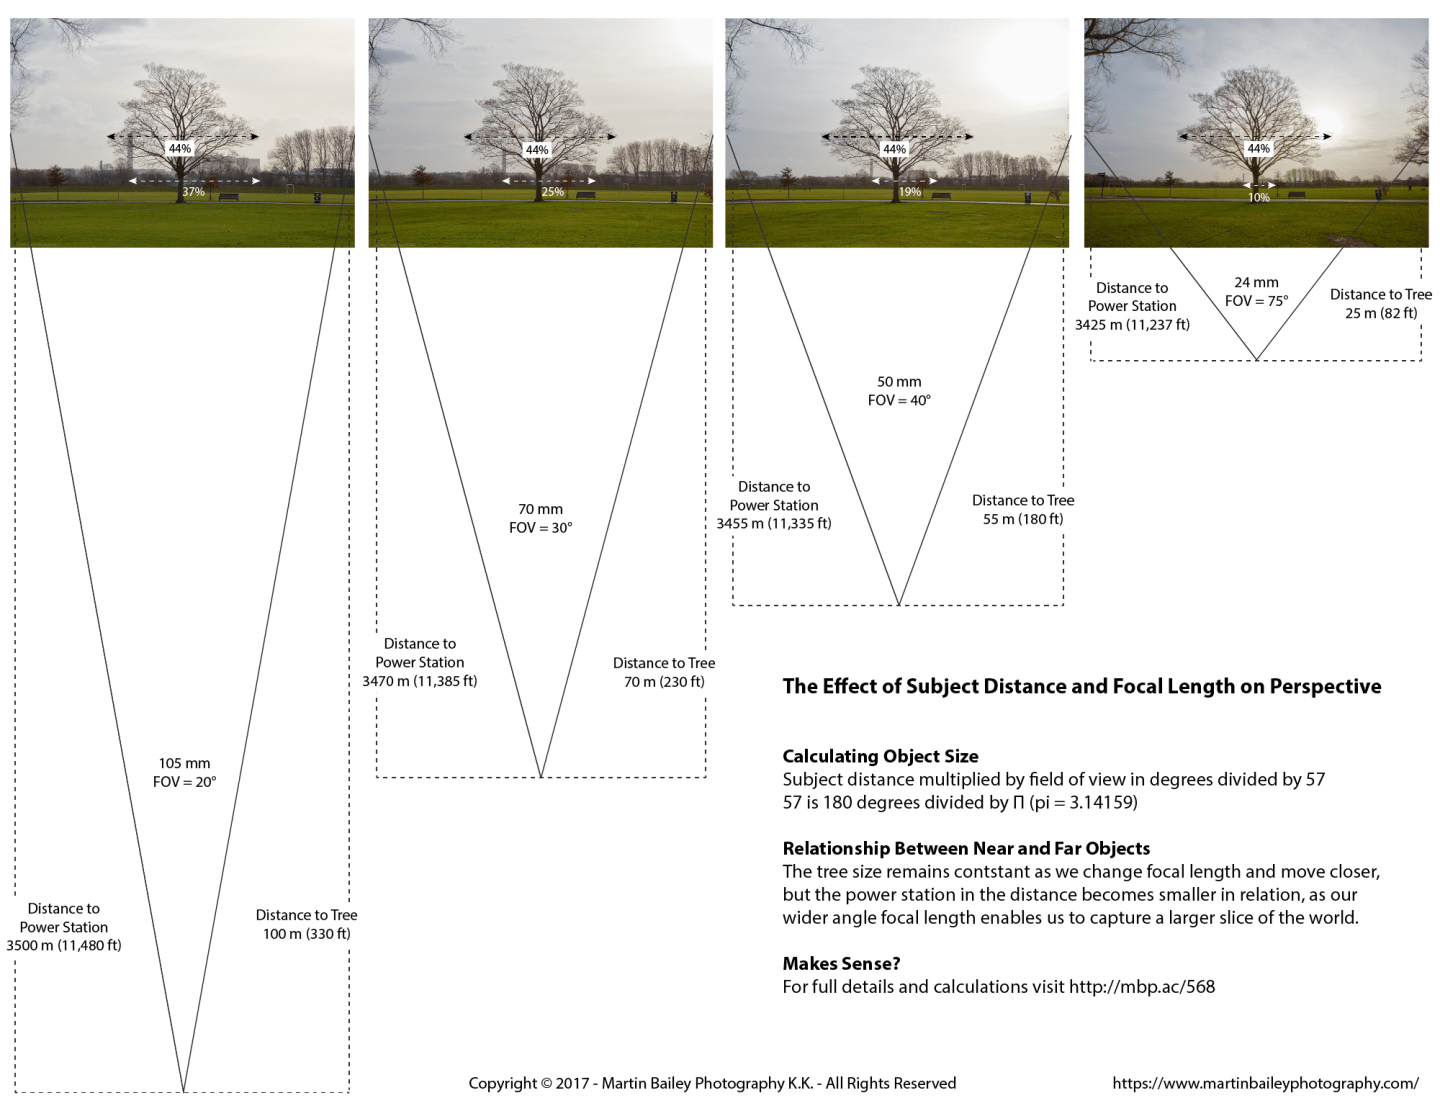 The Effect of Subject Distance and Focal Length on Perspective